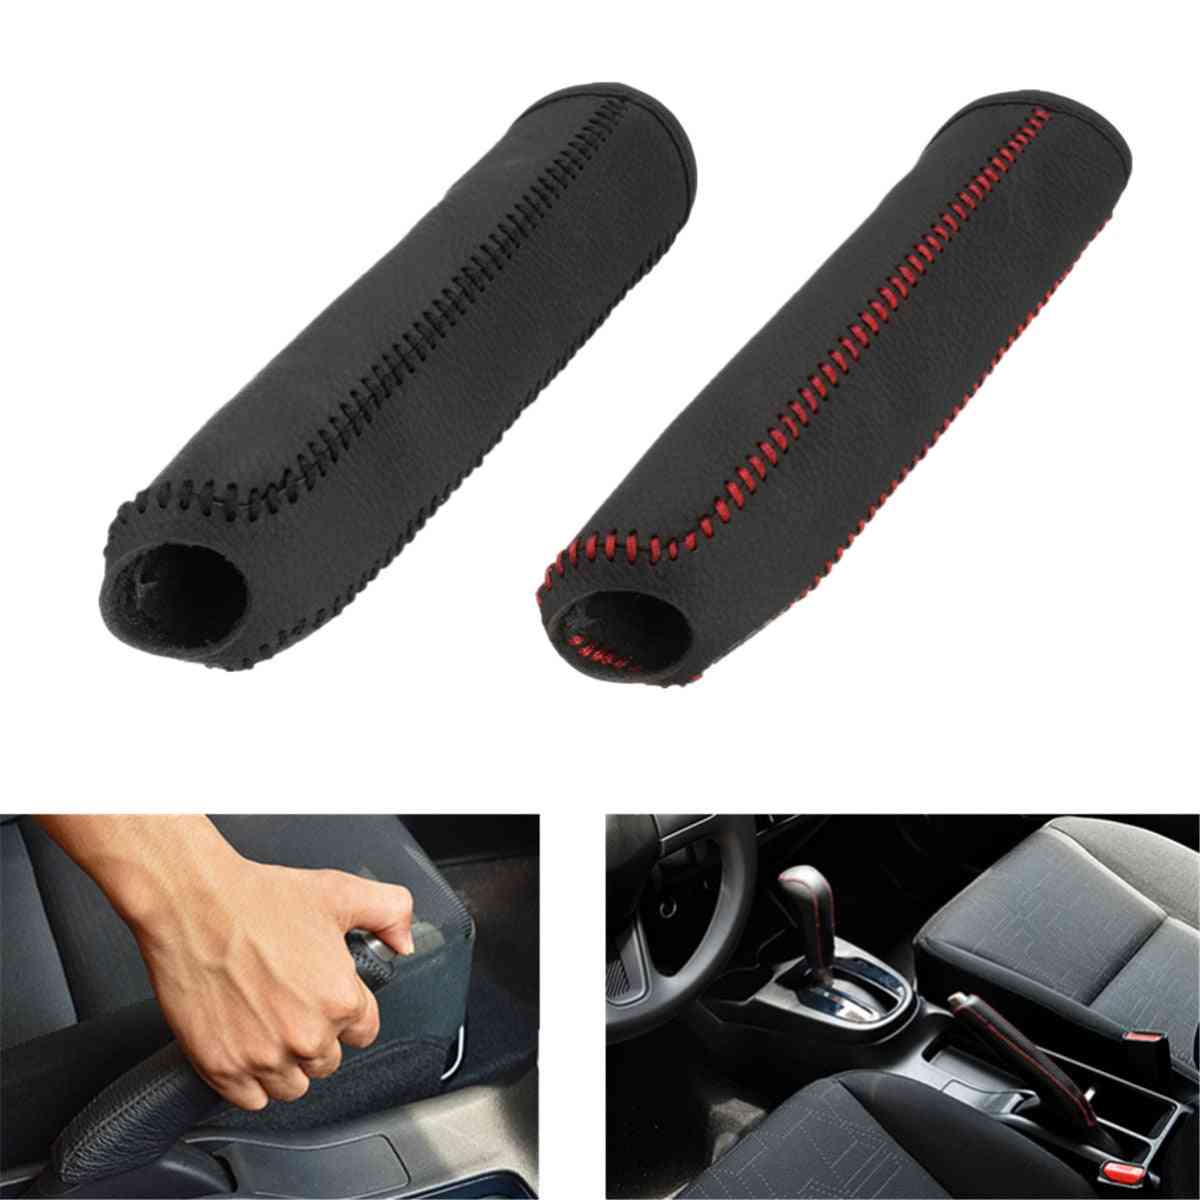 Leather Car Hand Brake Cover- Protective Sleeve